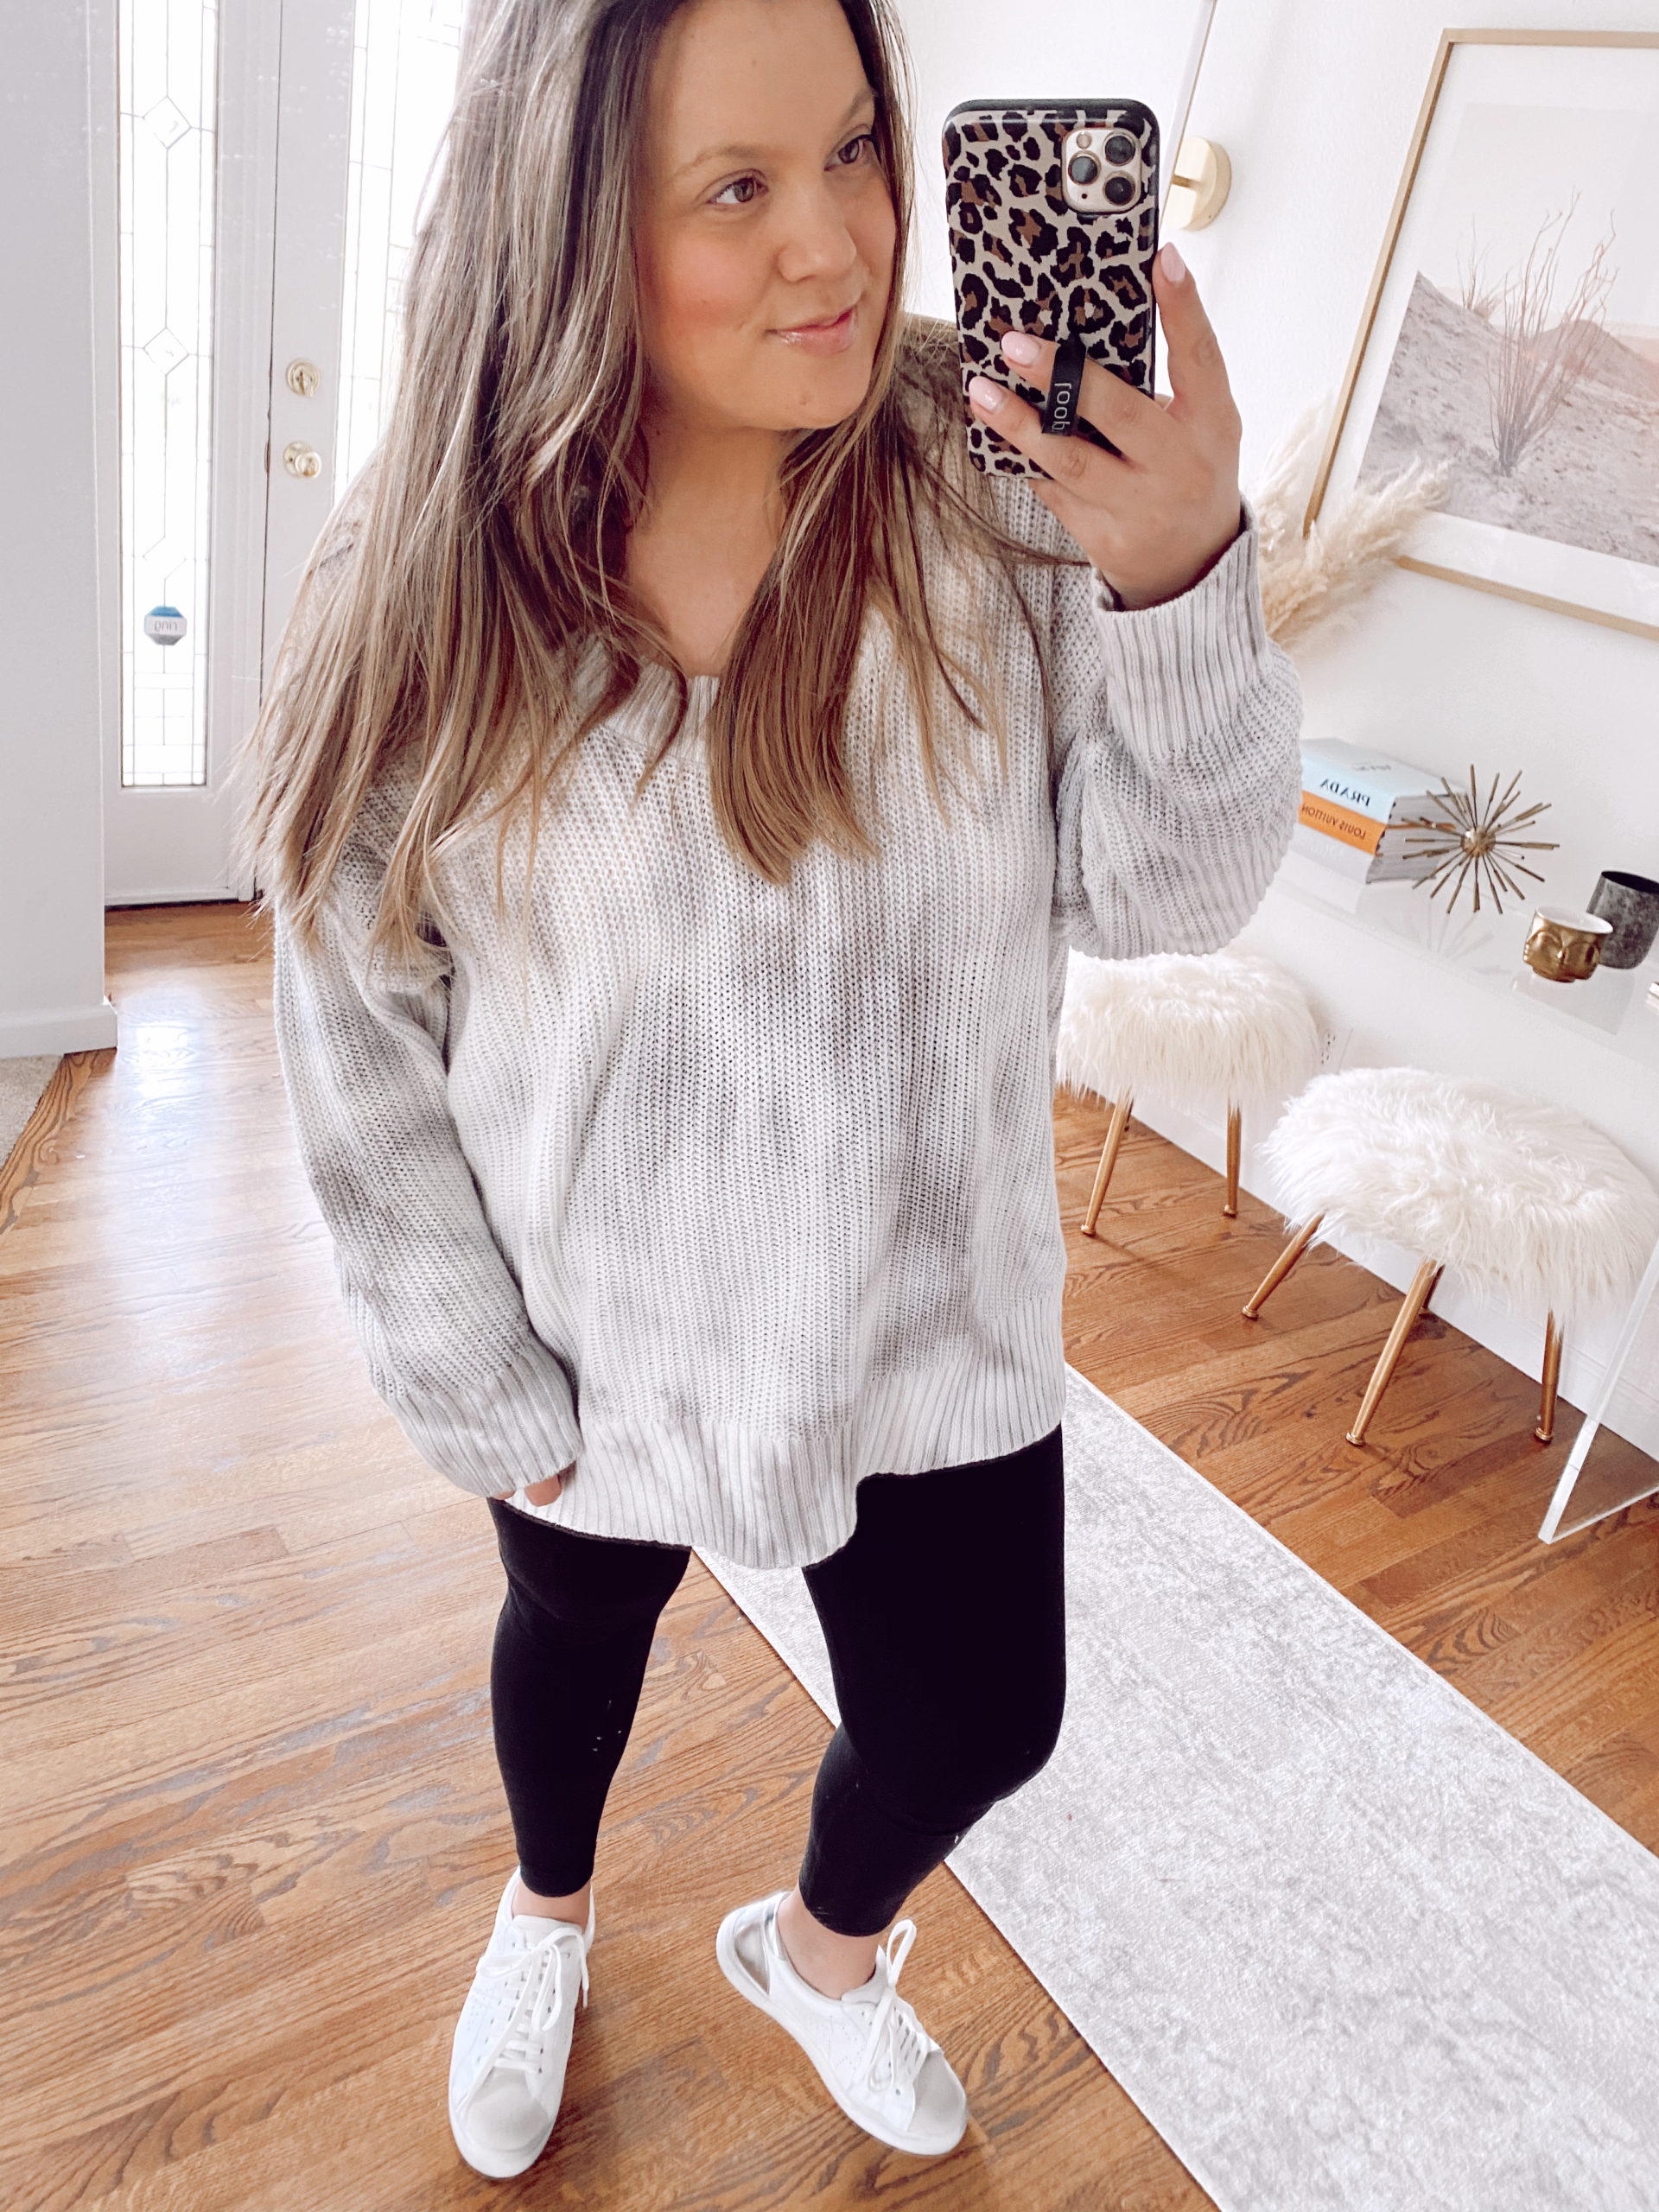 Reno blogger, Ashley Zeal, from Two Peas in a Prada shares her top picks from the Aerie Sale. Stock up on all the lounge wear! 